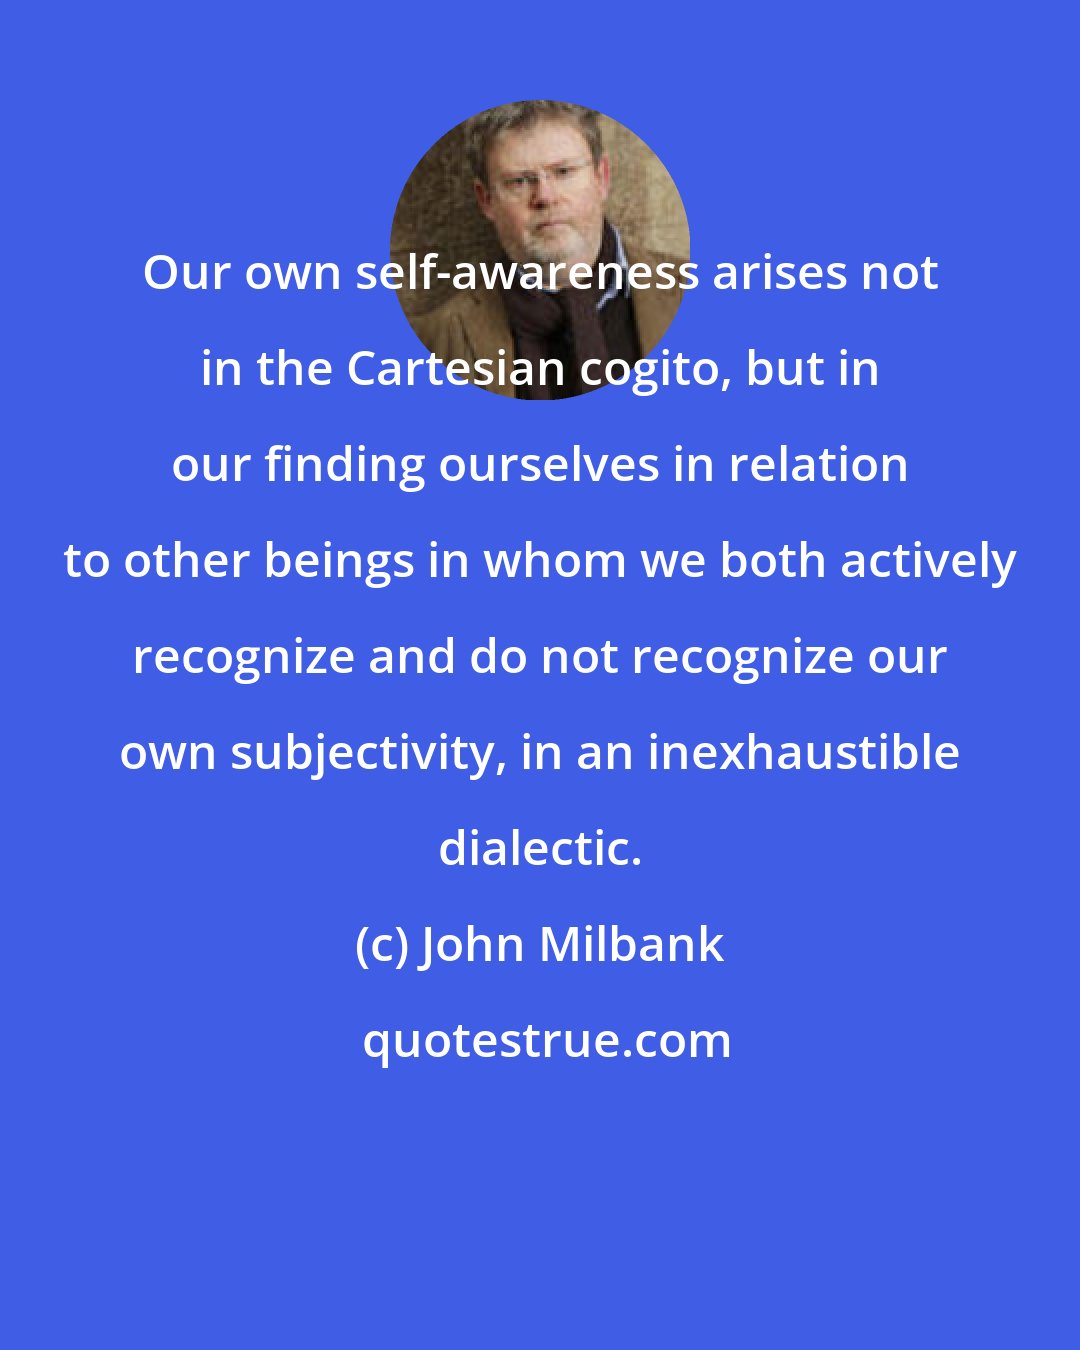 John Milbank: Our own self-awareness arises not in the Cartesian cogito, but in our finding ourselves in relation to other beings in whom we both actively recognize and do not recognize our own subjectivity, in an inexhaustible dialectic.